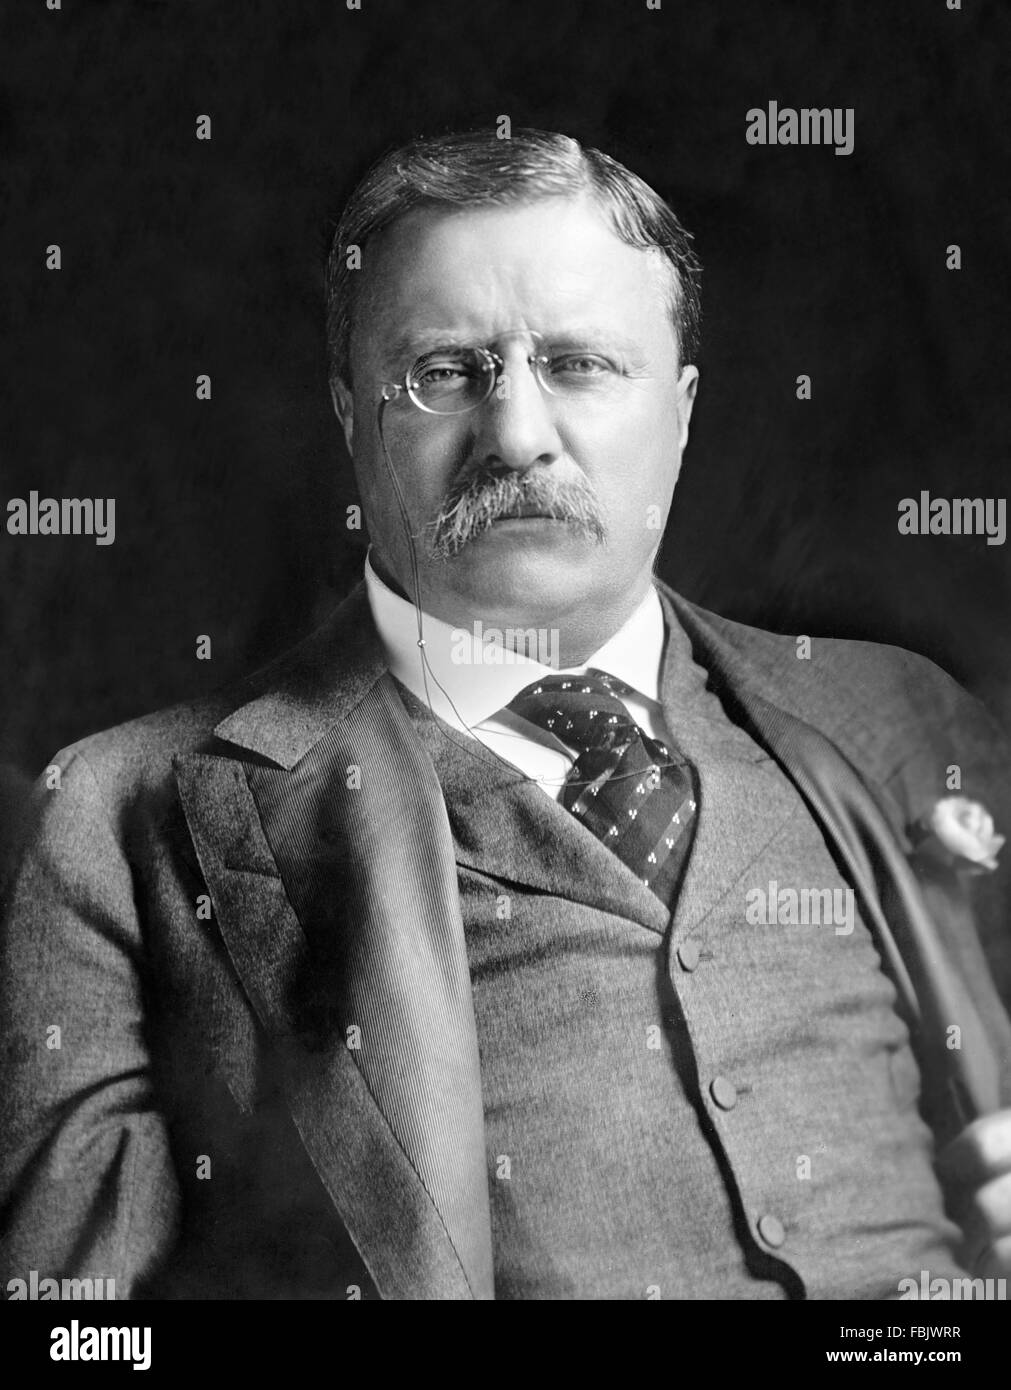 Theodore Roosevelt, portrait of the 26th President of the USA, c.1907 Stock Photo